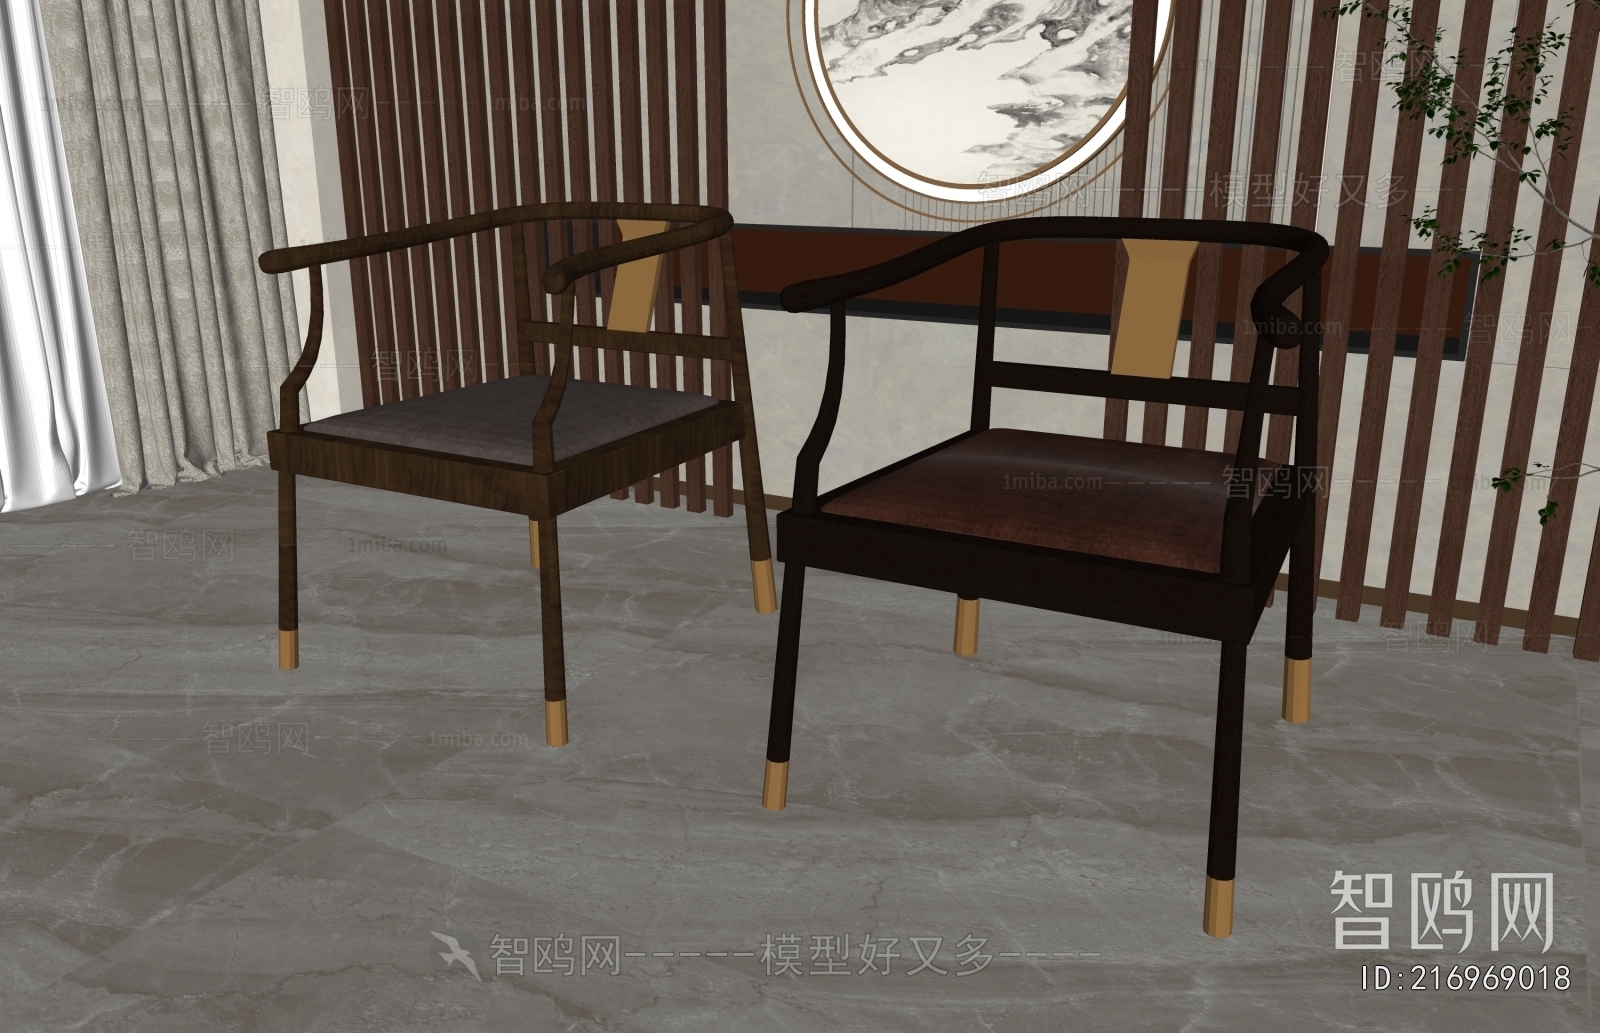 New Chinese Style Dining Chair